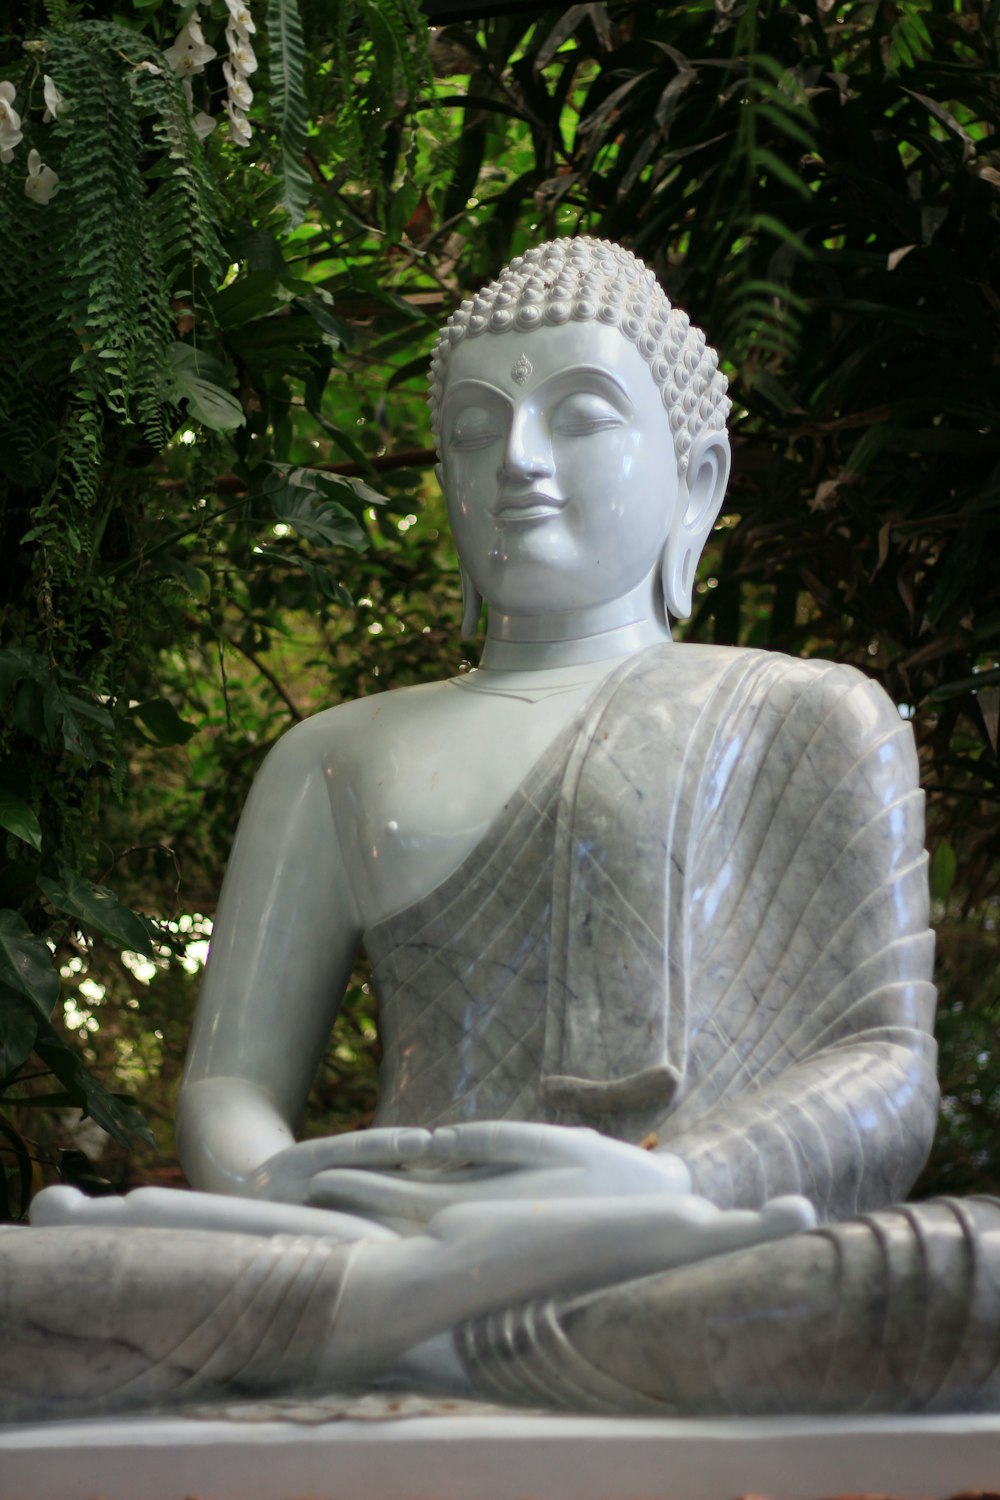 a statue of a buddha sitting in the middle of a forest